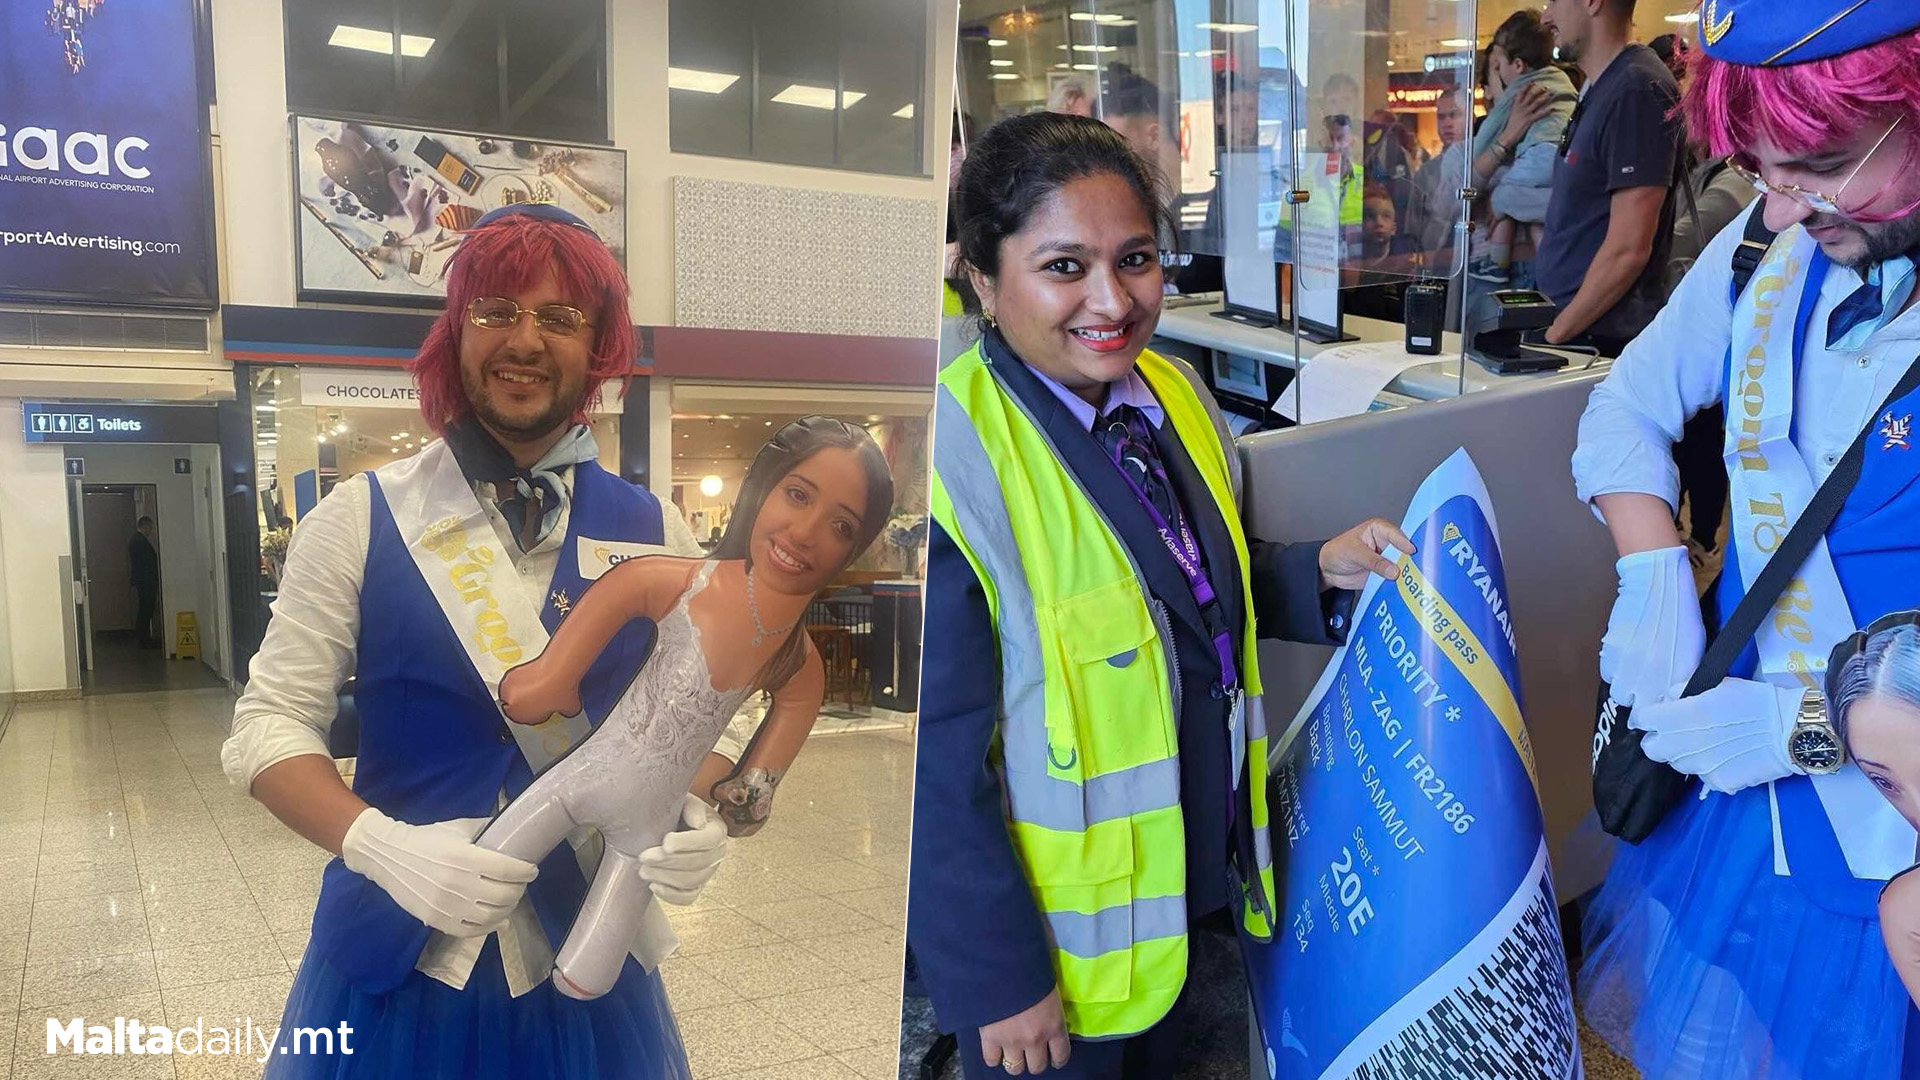 Groom Spotted Dressed Up As Ryan Air Hostess At Airport